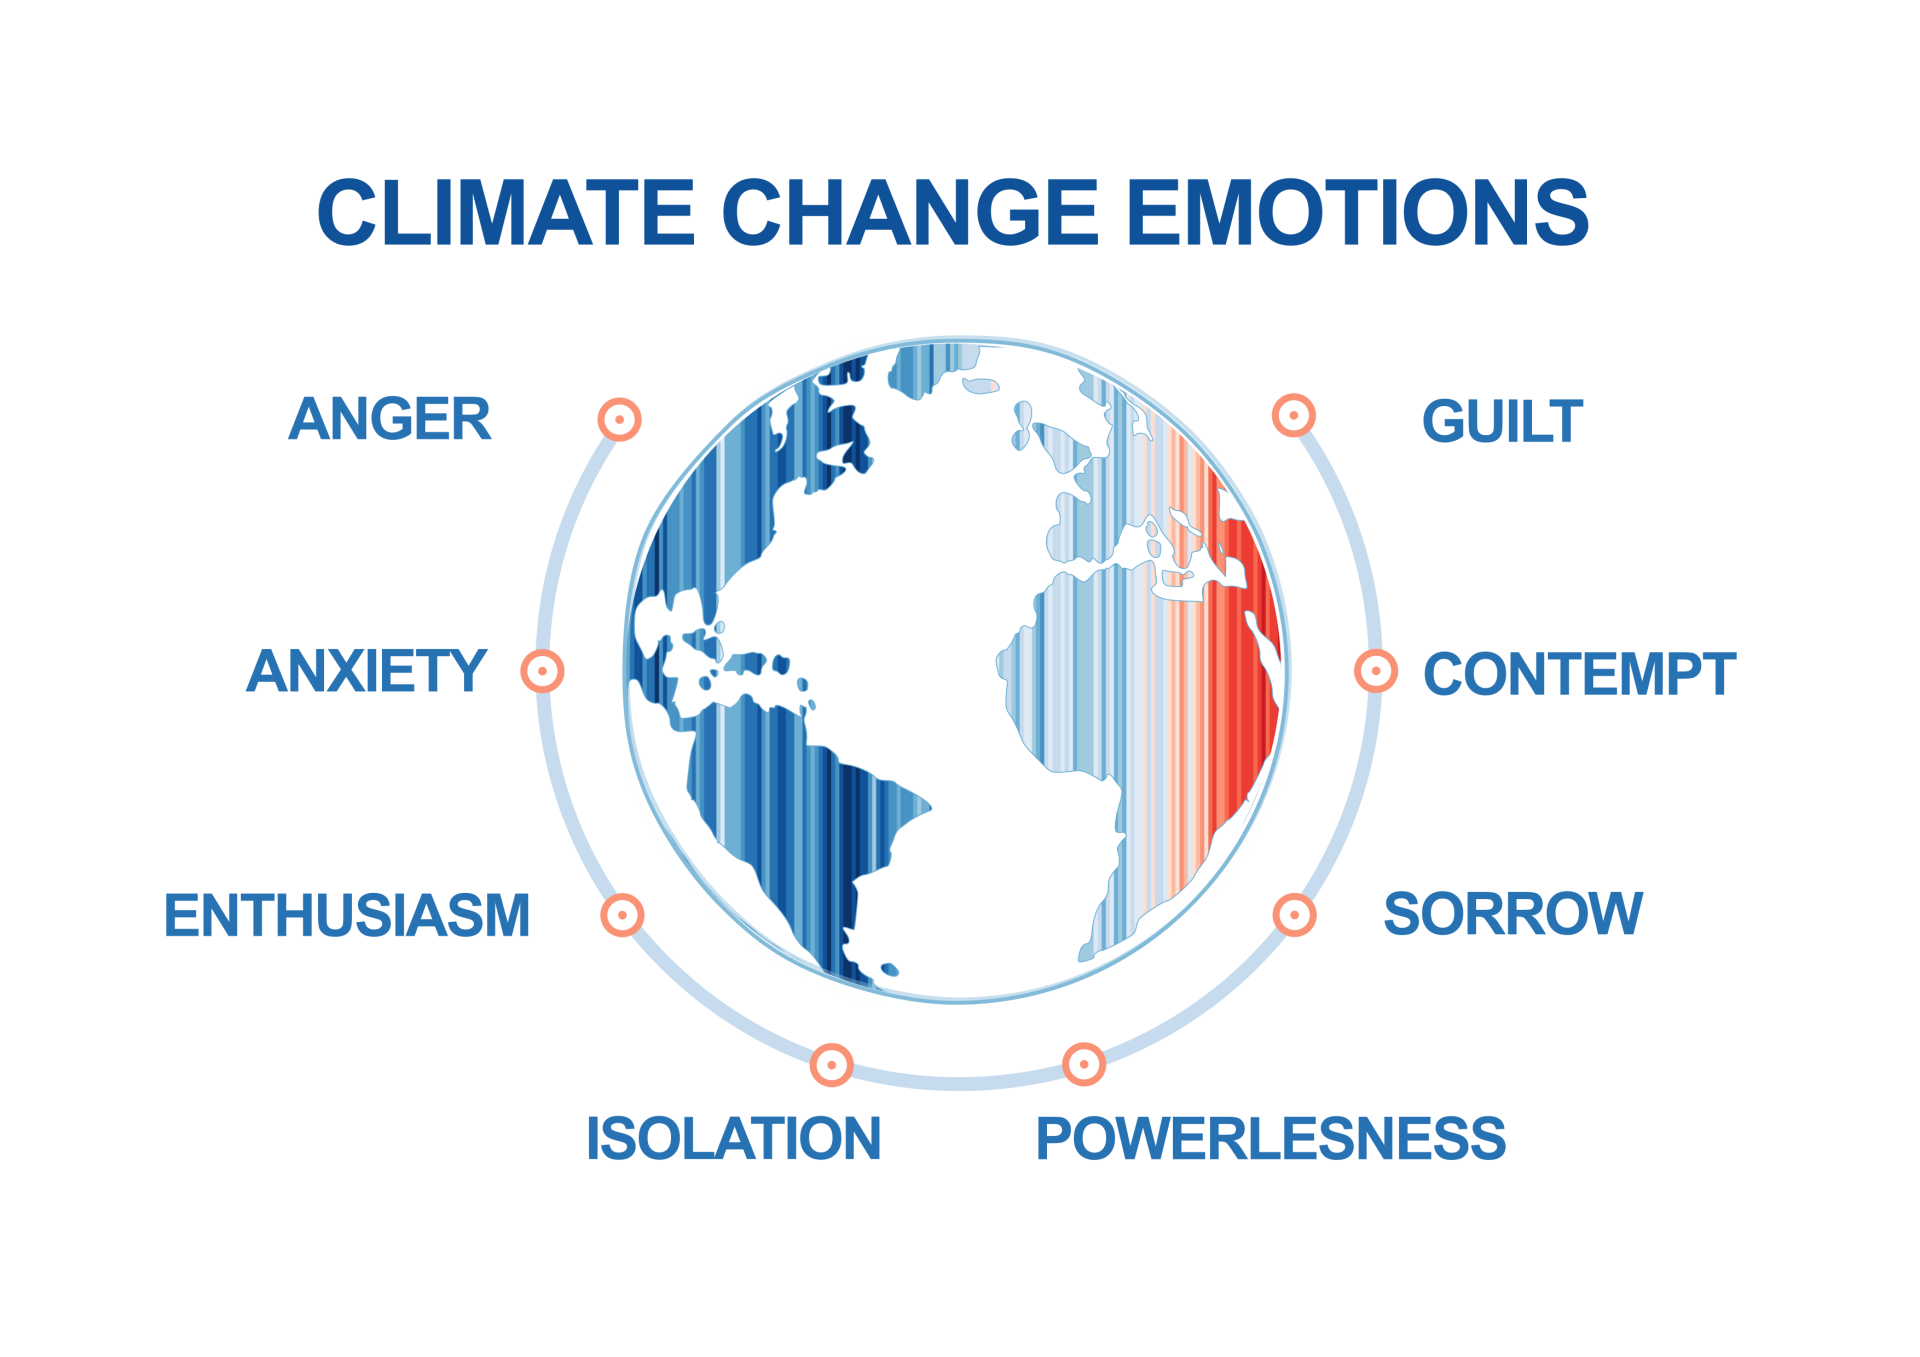 Figure 1. Emotions identified in the development of the Inventory of Climate Emotions (ICE).